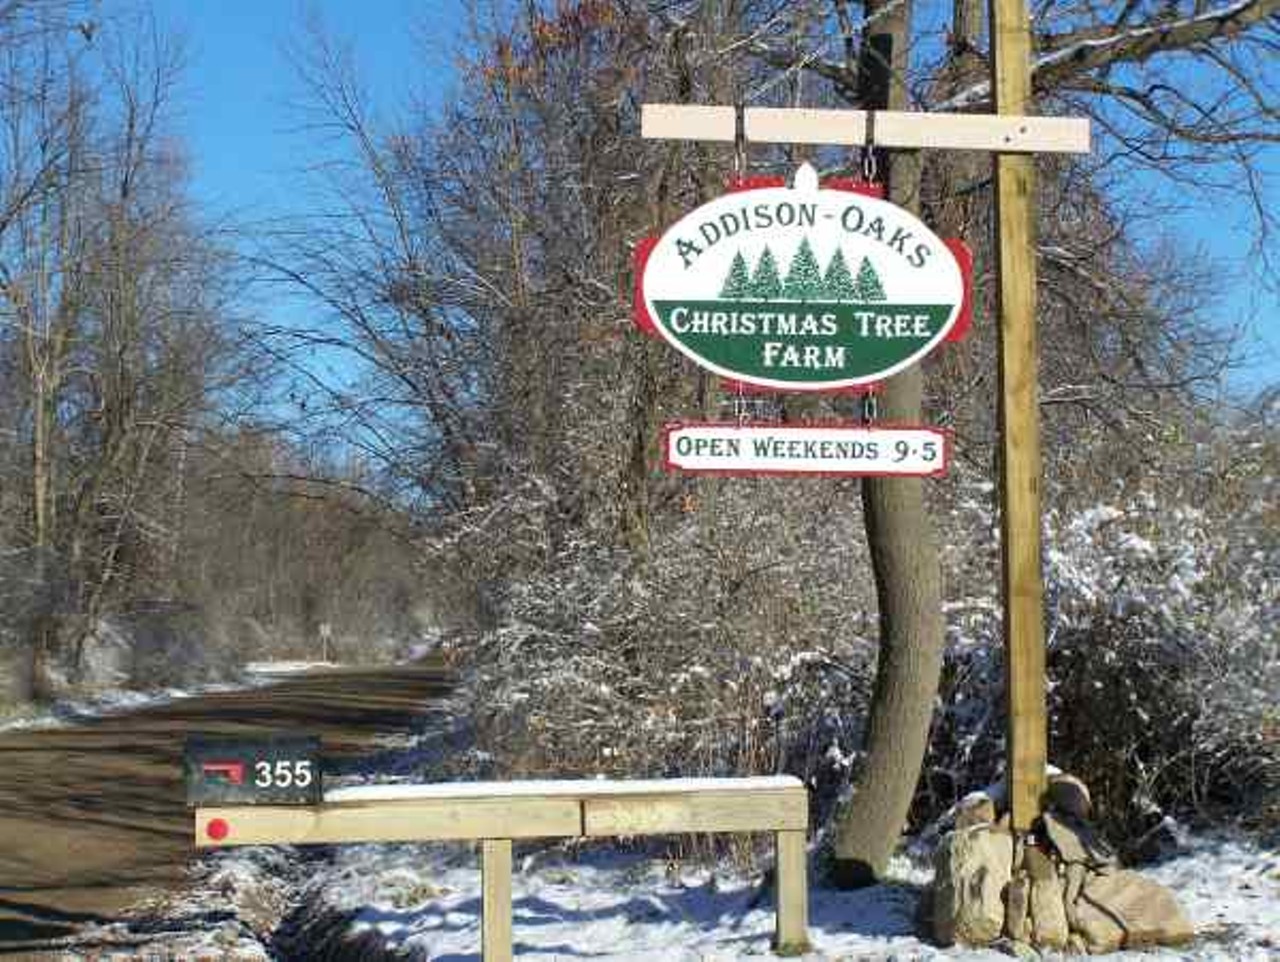 Addison-Oaks Christmas Tree Farm
355 Lake George Rd, Oakland, MI, 48363
(248) 814-0583  
Weekend Hours &#150; 9 am to 5 pm
Weekday Hours &#150; Noon to 5 pm